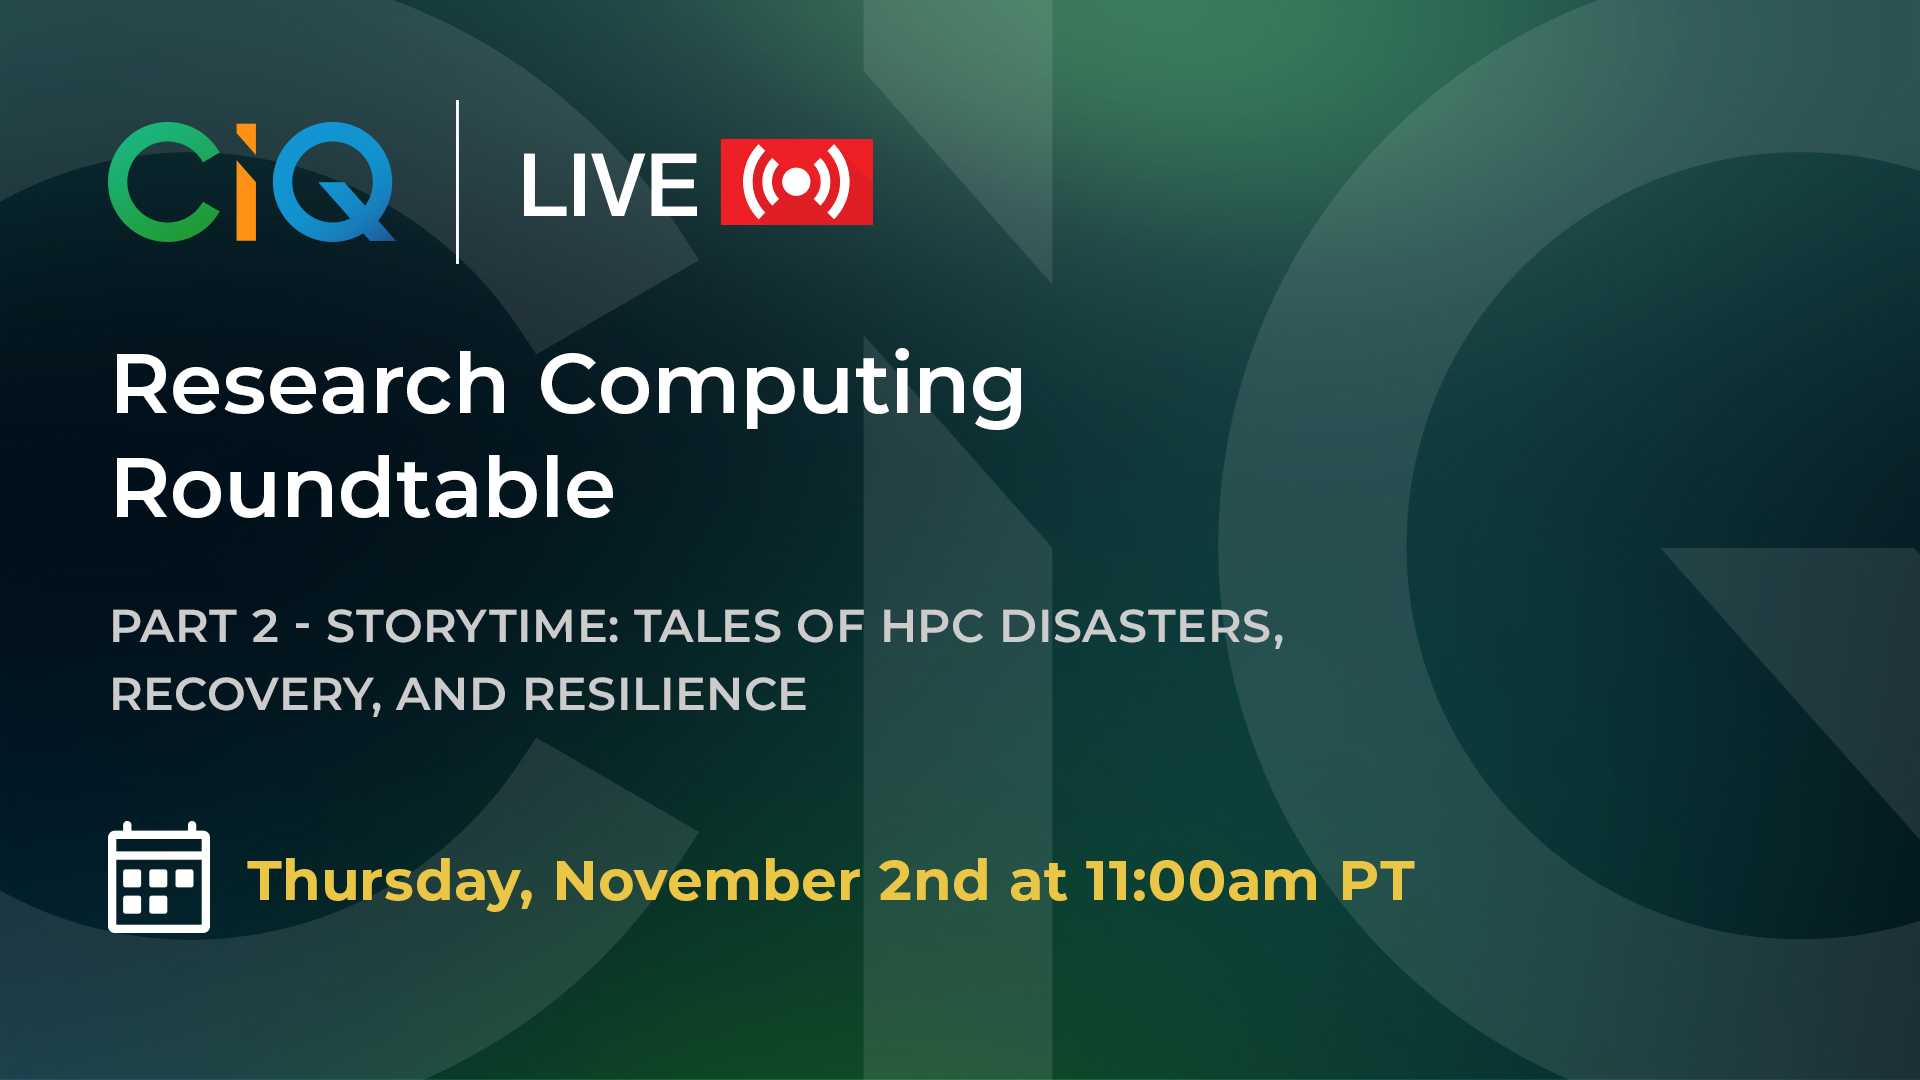 Part 2 - Storytime: Tales of HPC Disasters, Recovery, and Resilience